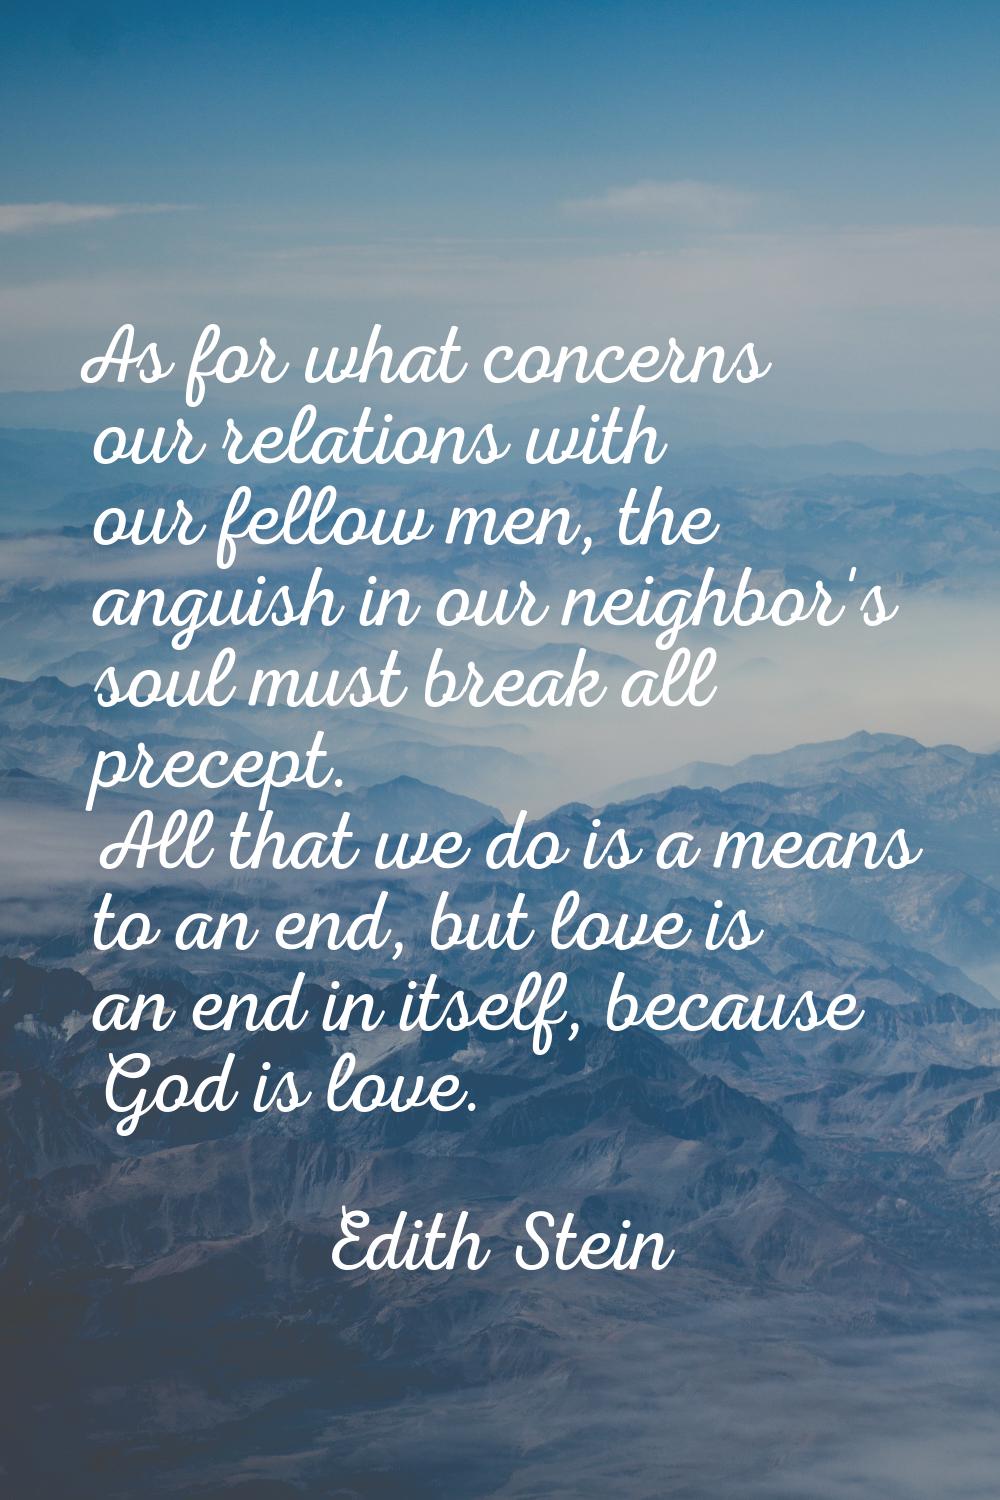 As for what concerns our relations with our fellow men, the anguish in our neighbor's soul must bre